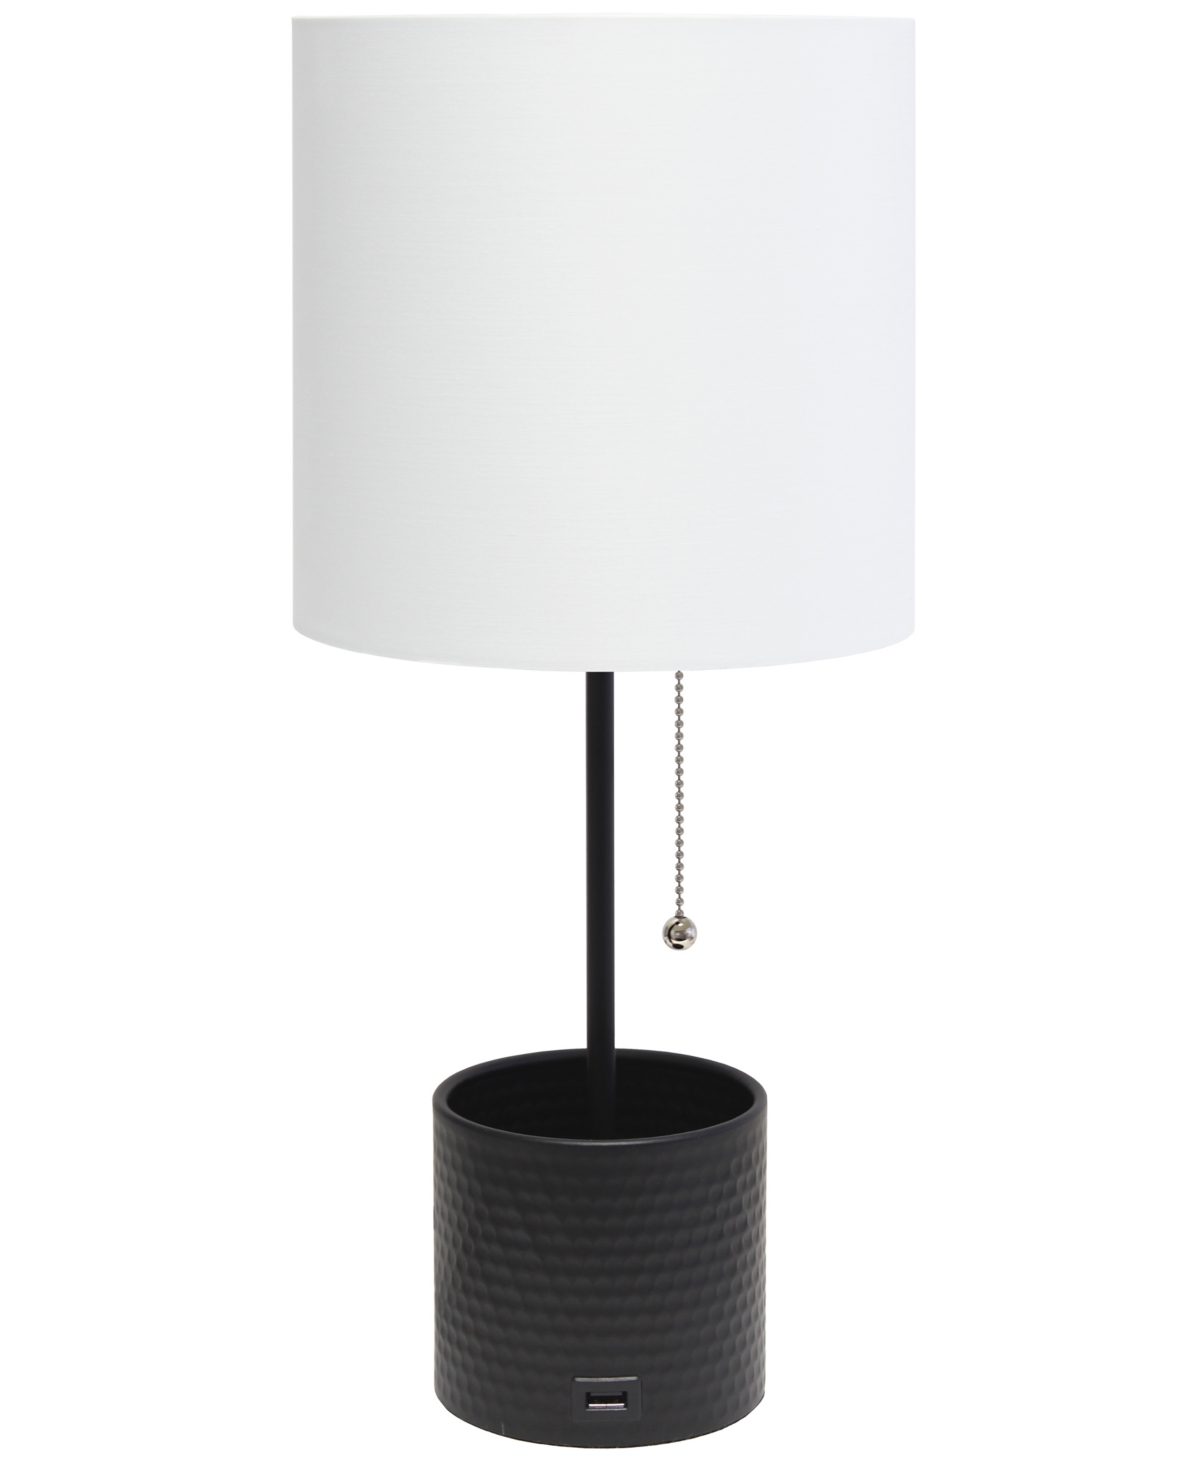 Simple Designs Hammered Metal Organizer Table Lamp With Usb Charging Port And Fabric Shade In Black,white